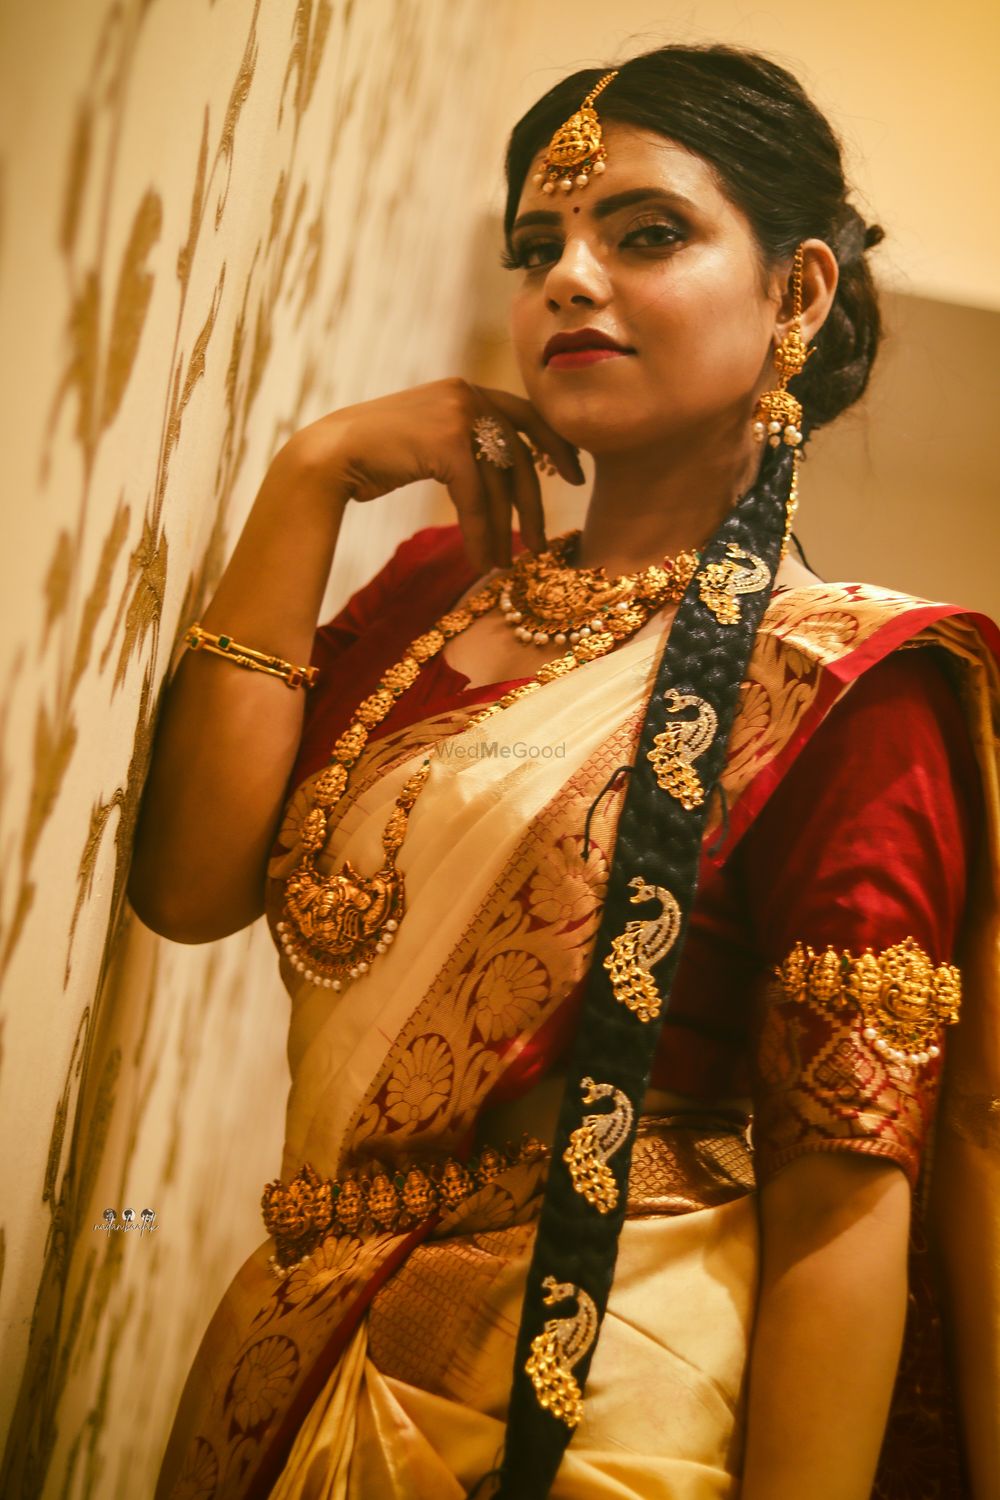 Photo From Bridal Makeup  - By Skins75 Unisex Salon